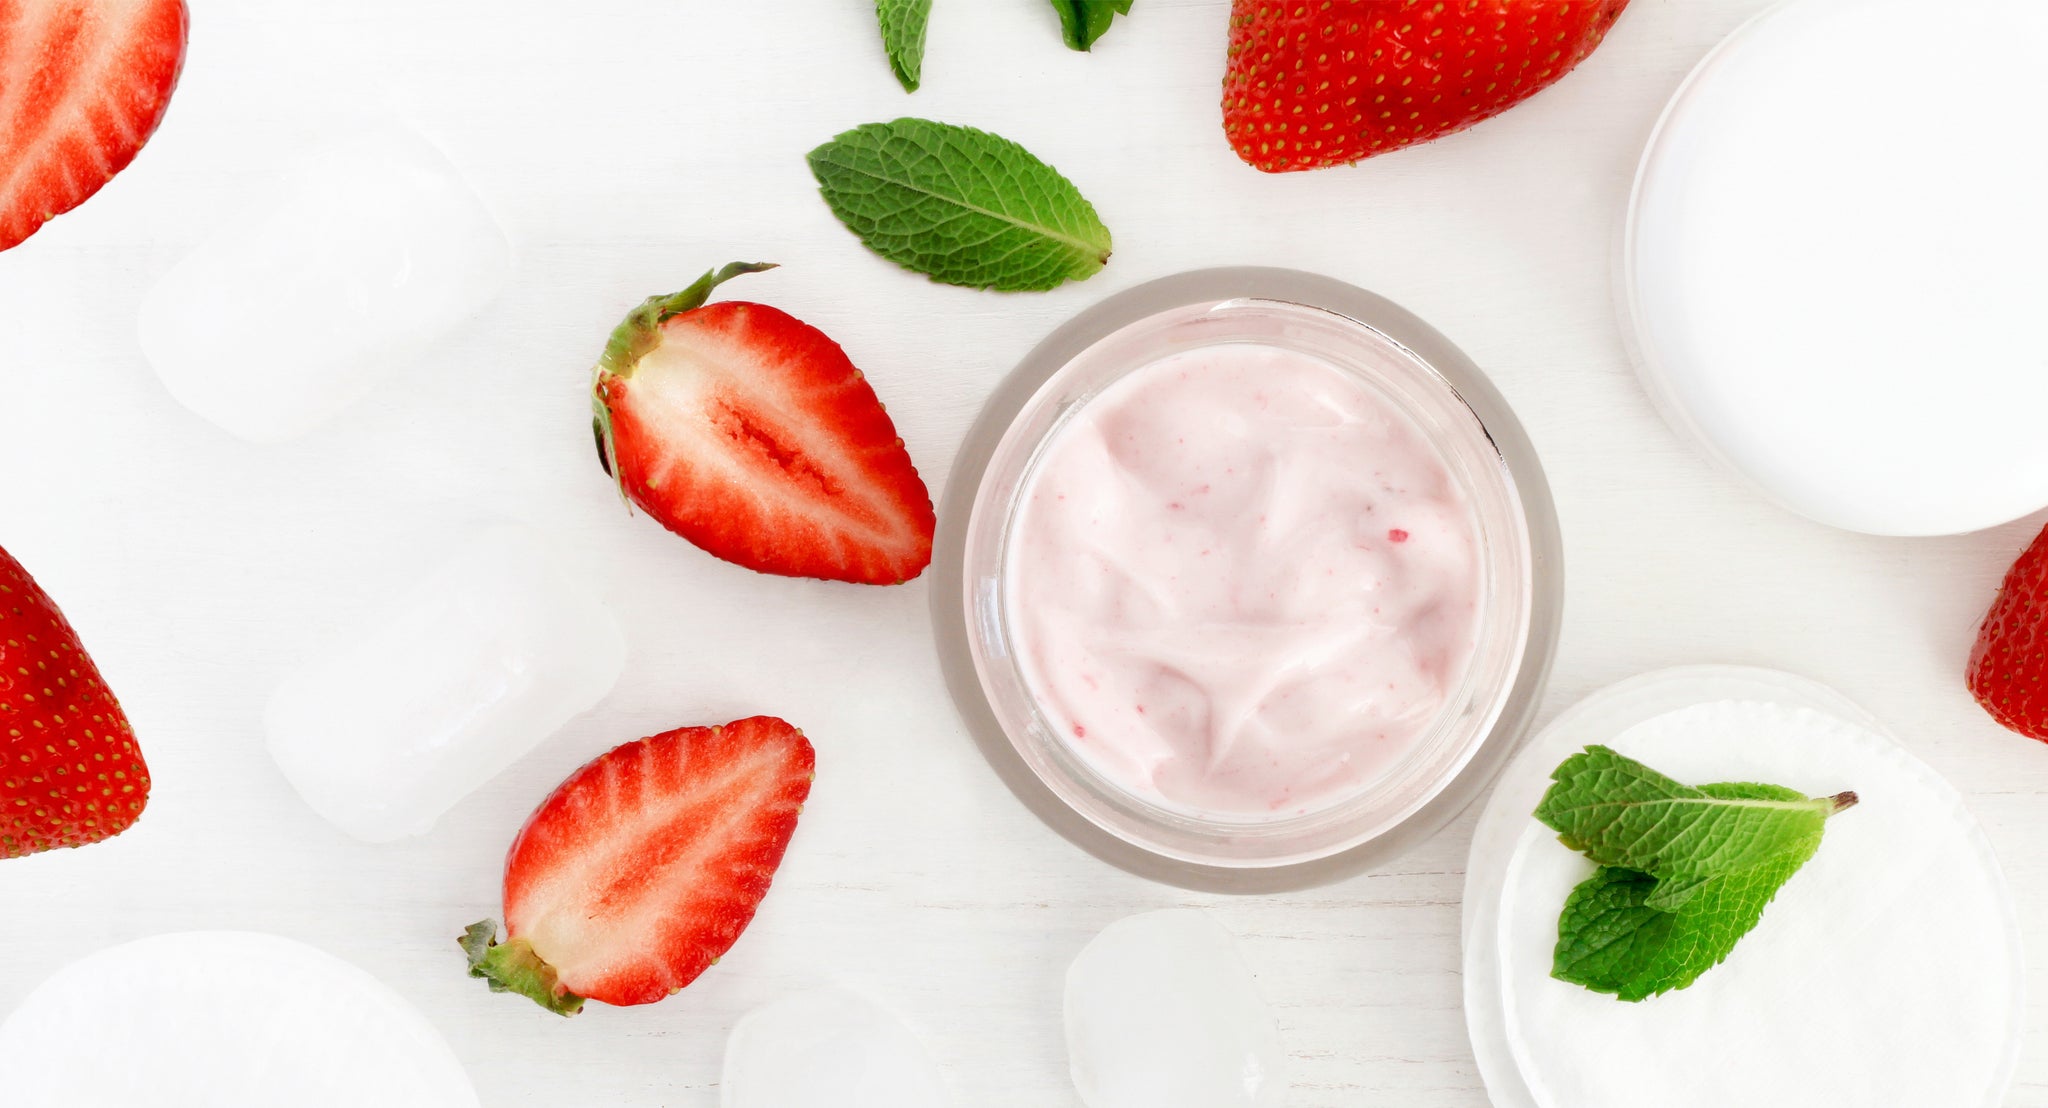 What Does Strawberry Do For Skin?